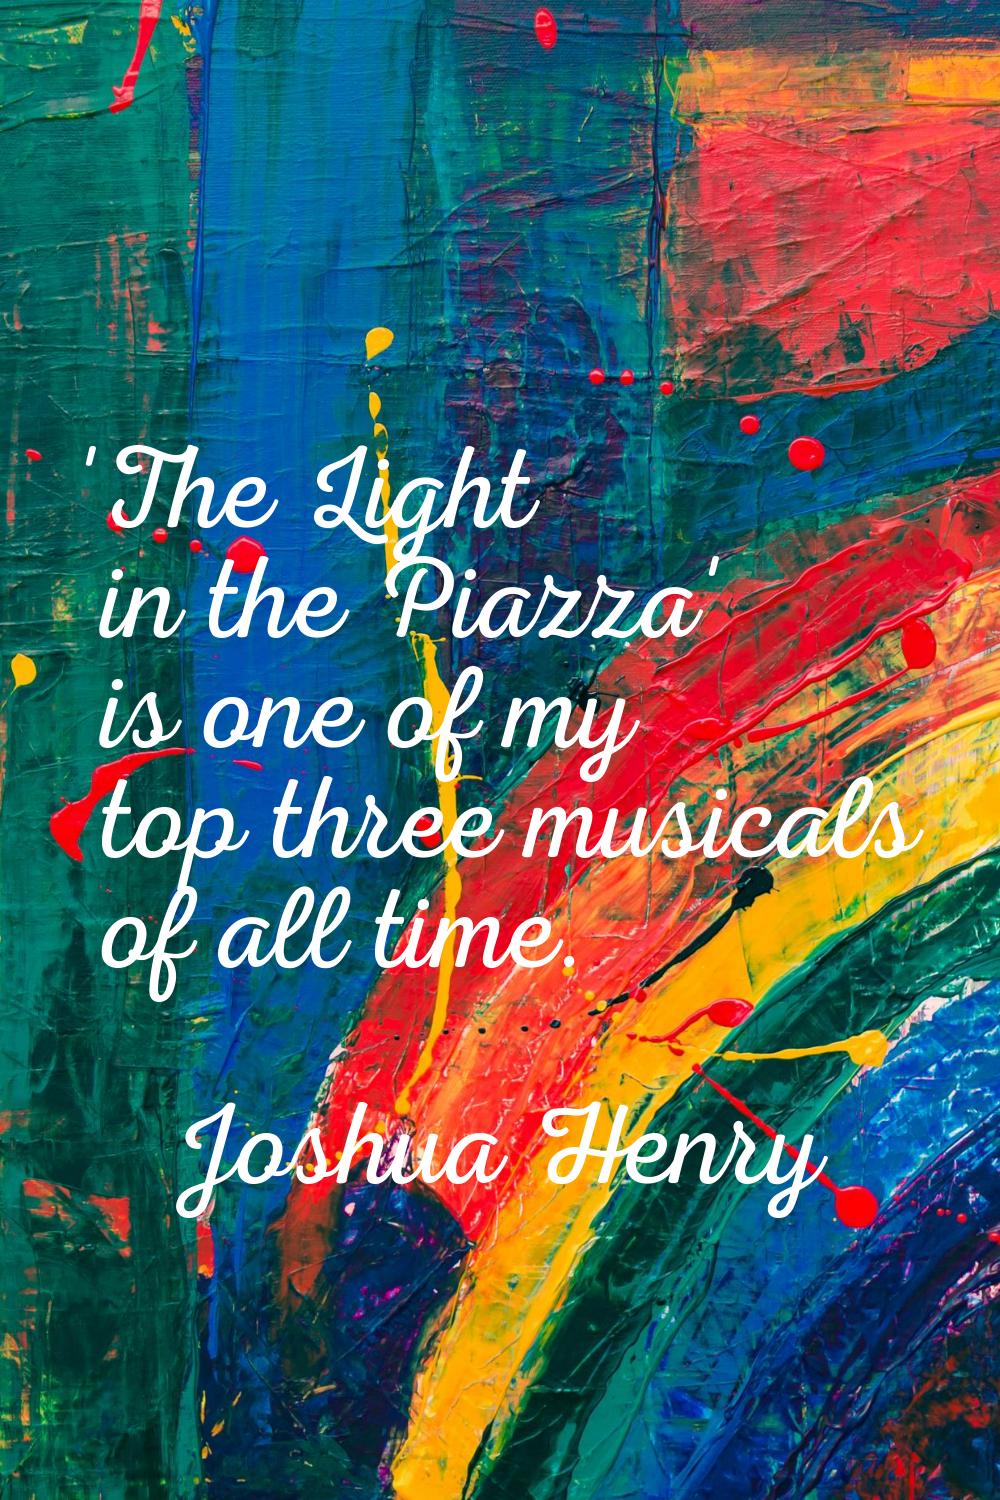 'The Light in the Piazza' is one of my top three musicals of all time.